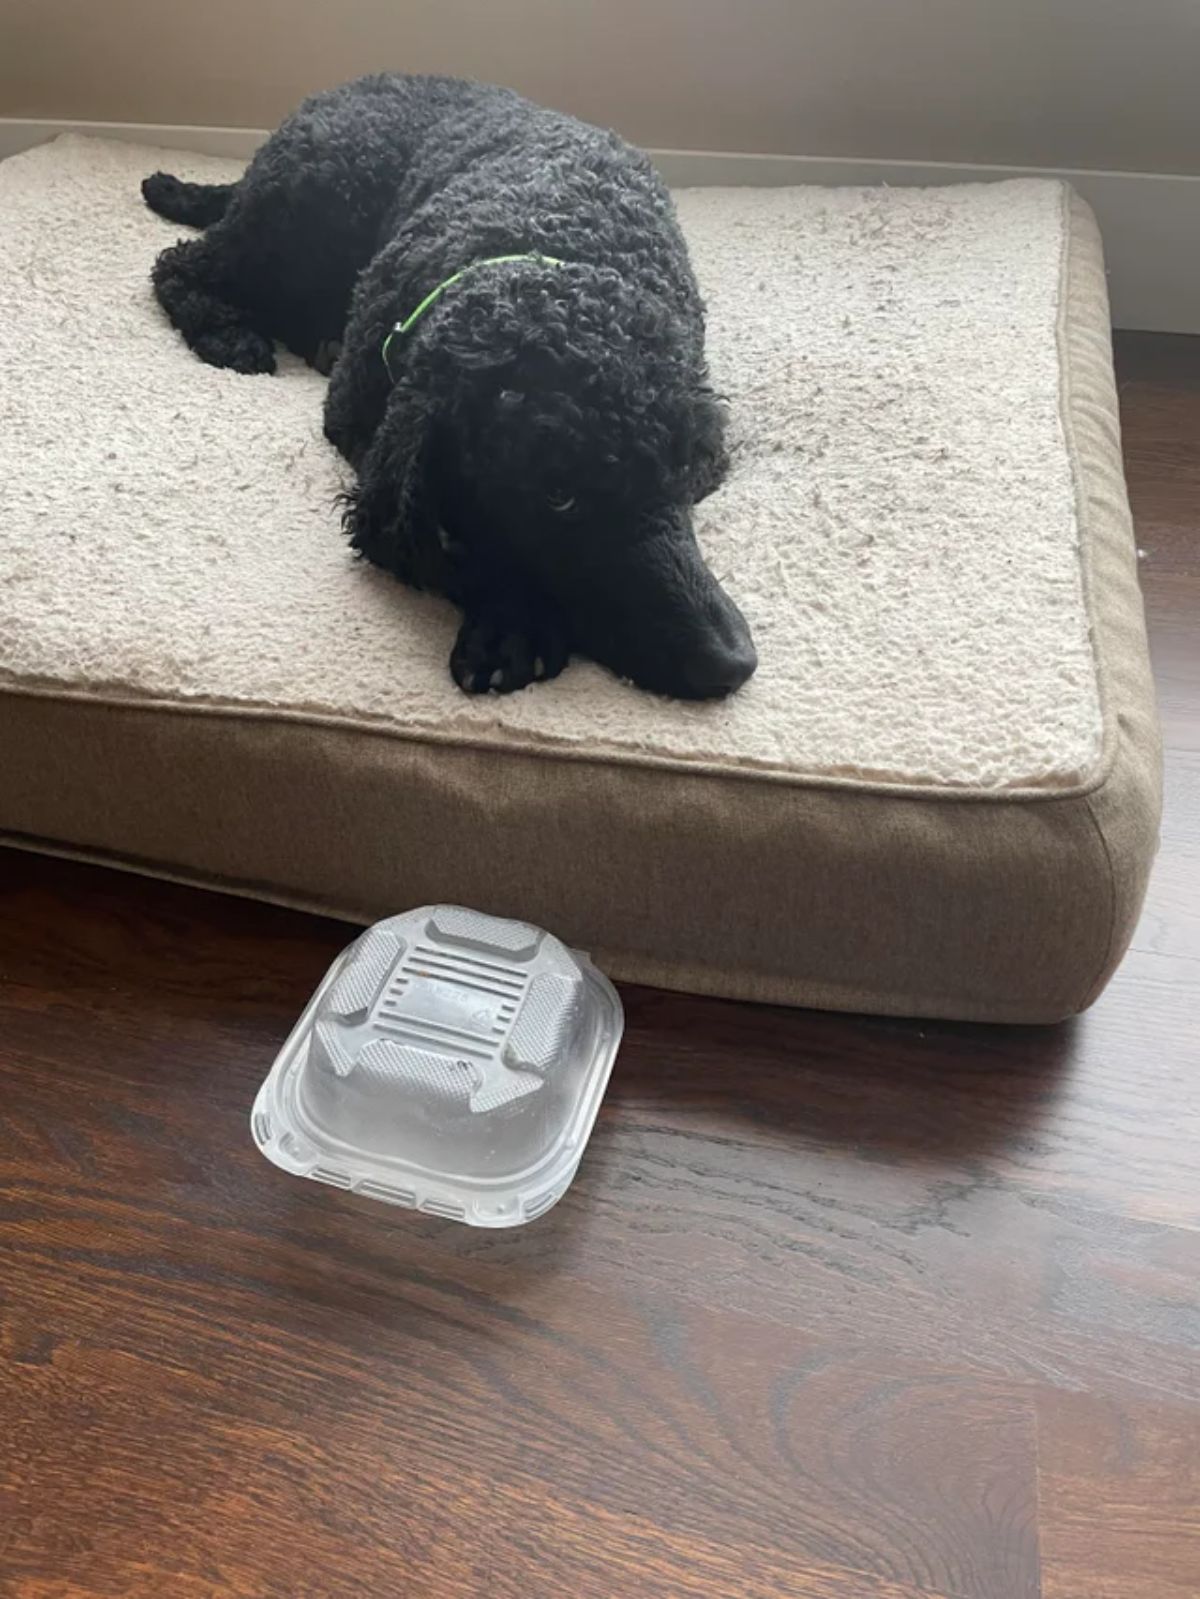 black poodle laying on brown dog bed with a plastic takeout container on the floor in front of the dog